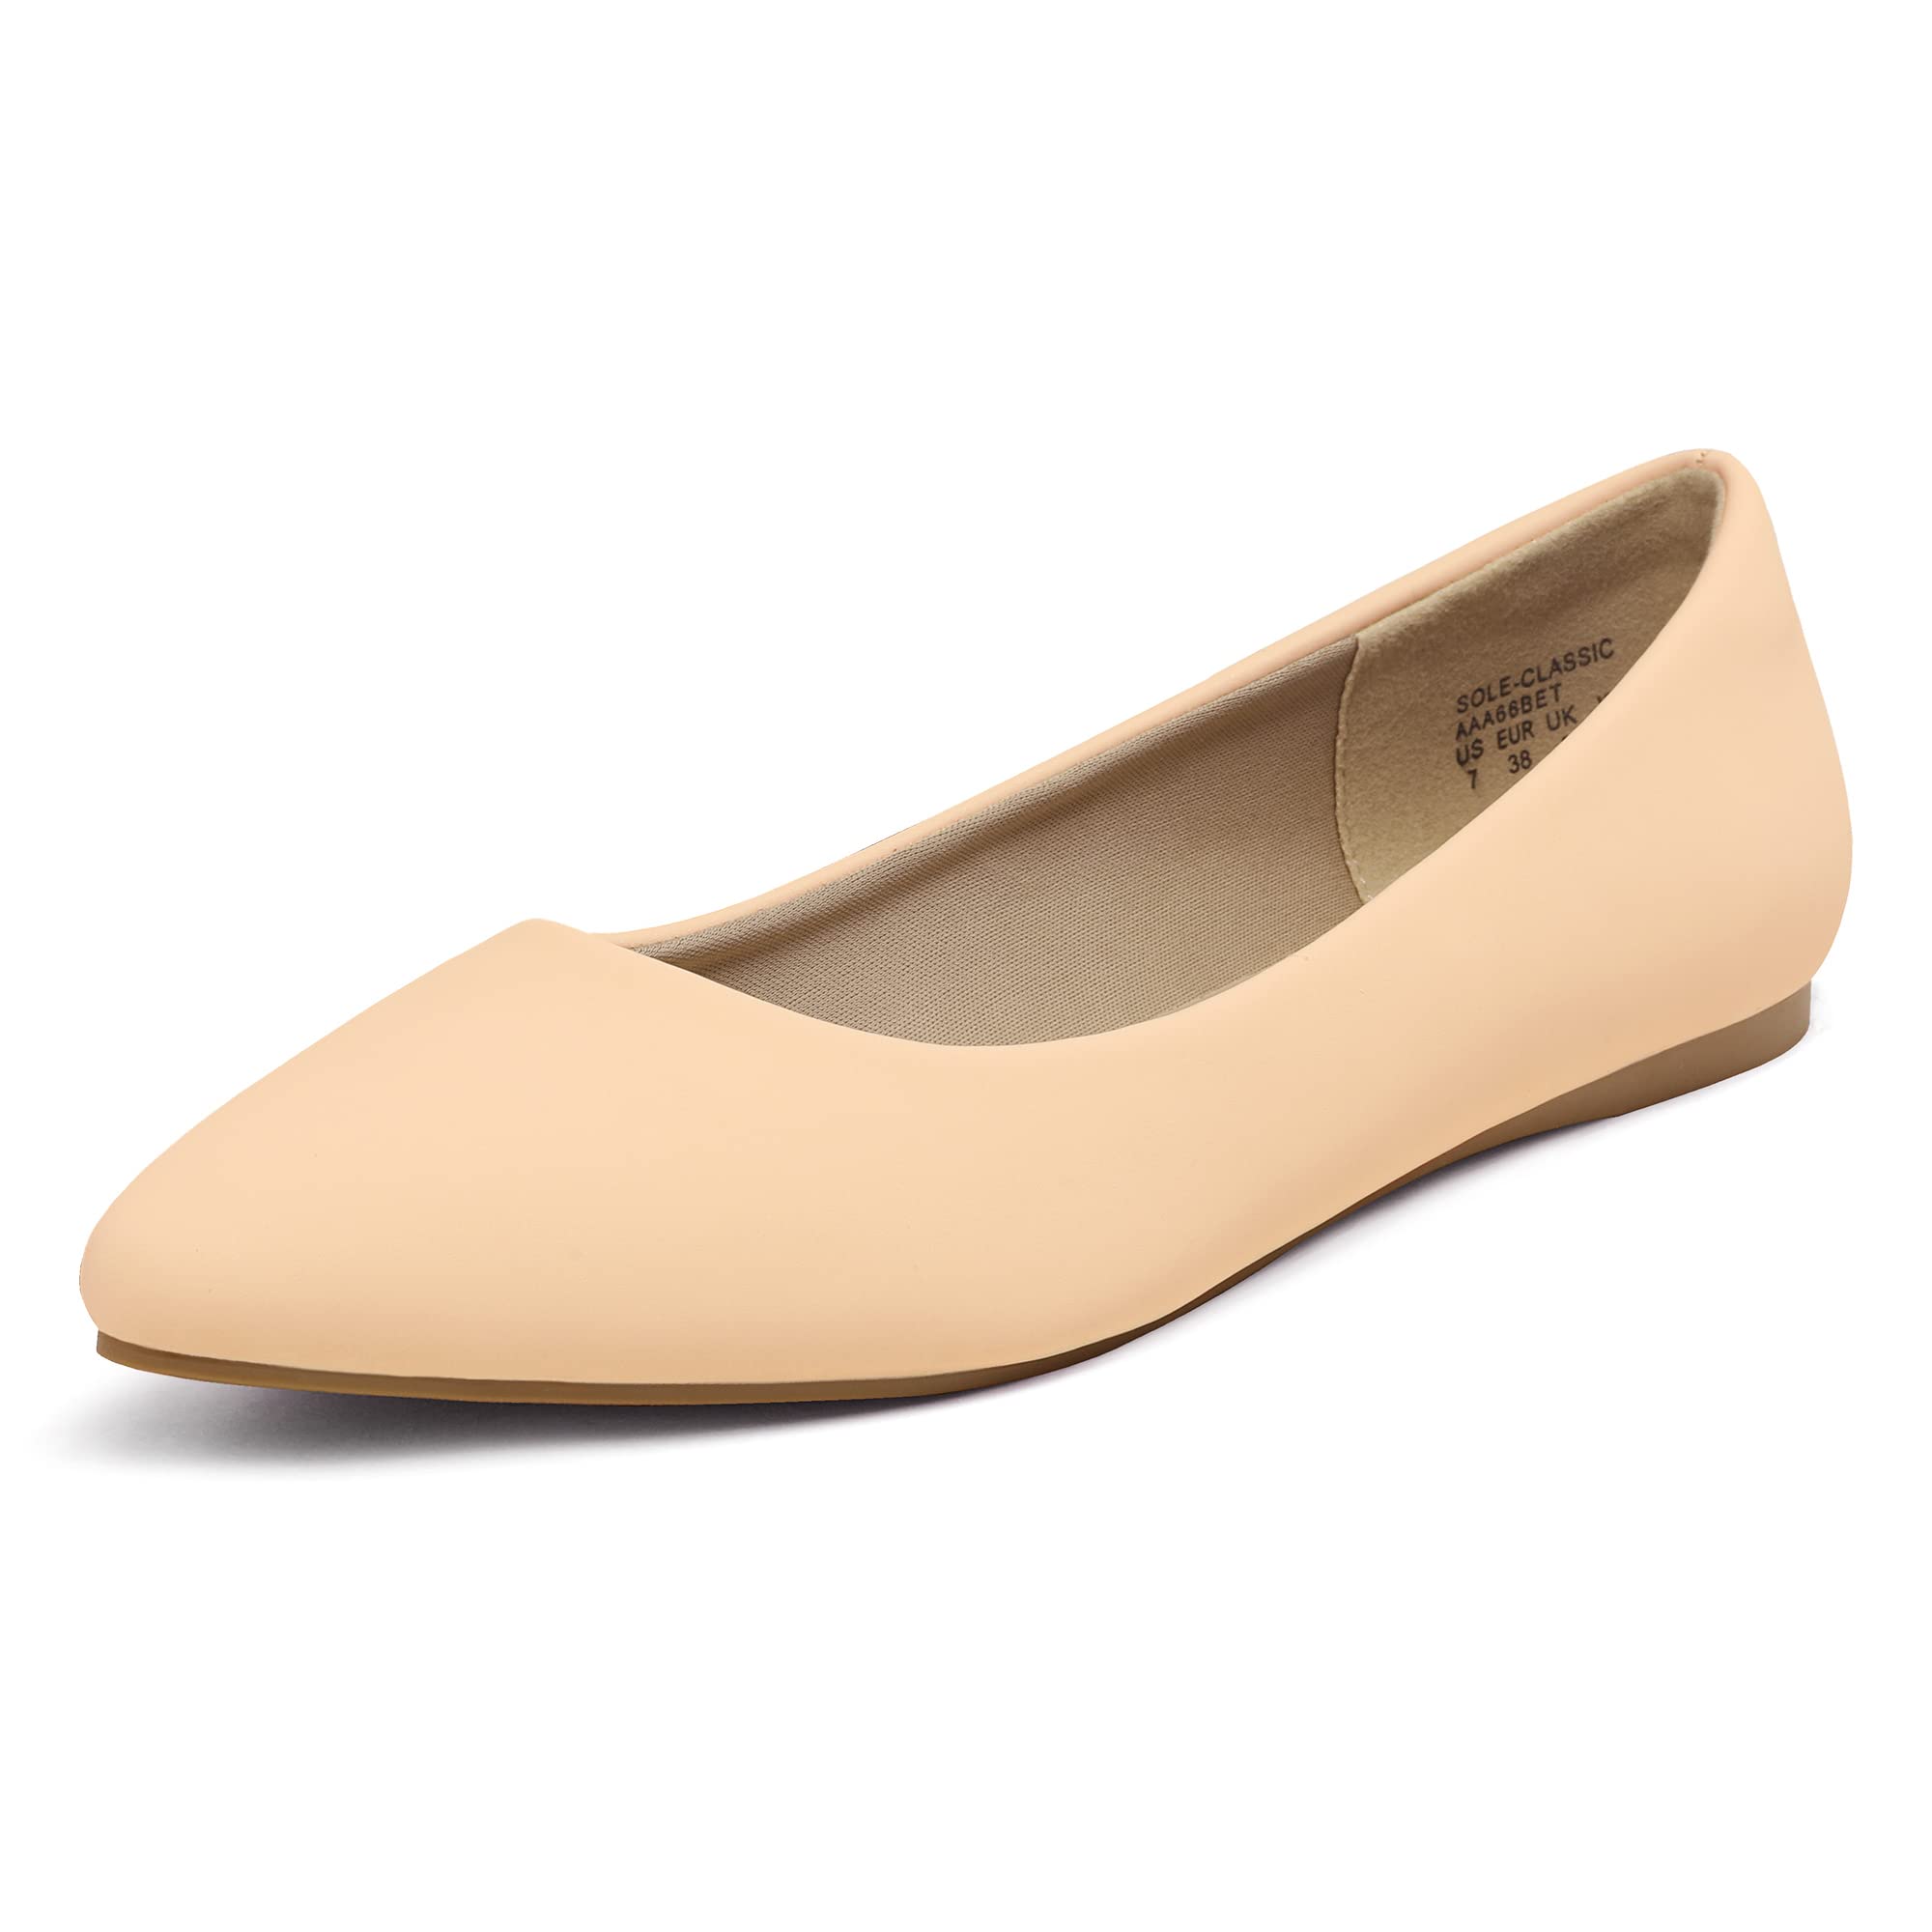 DREAM PAIRS Sole classic Womens casual Pointed Toe Ballet comfort Soft Slip On Flats Shoes Nude Nubuck Size 5